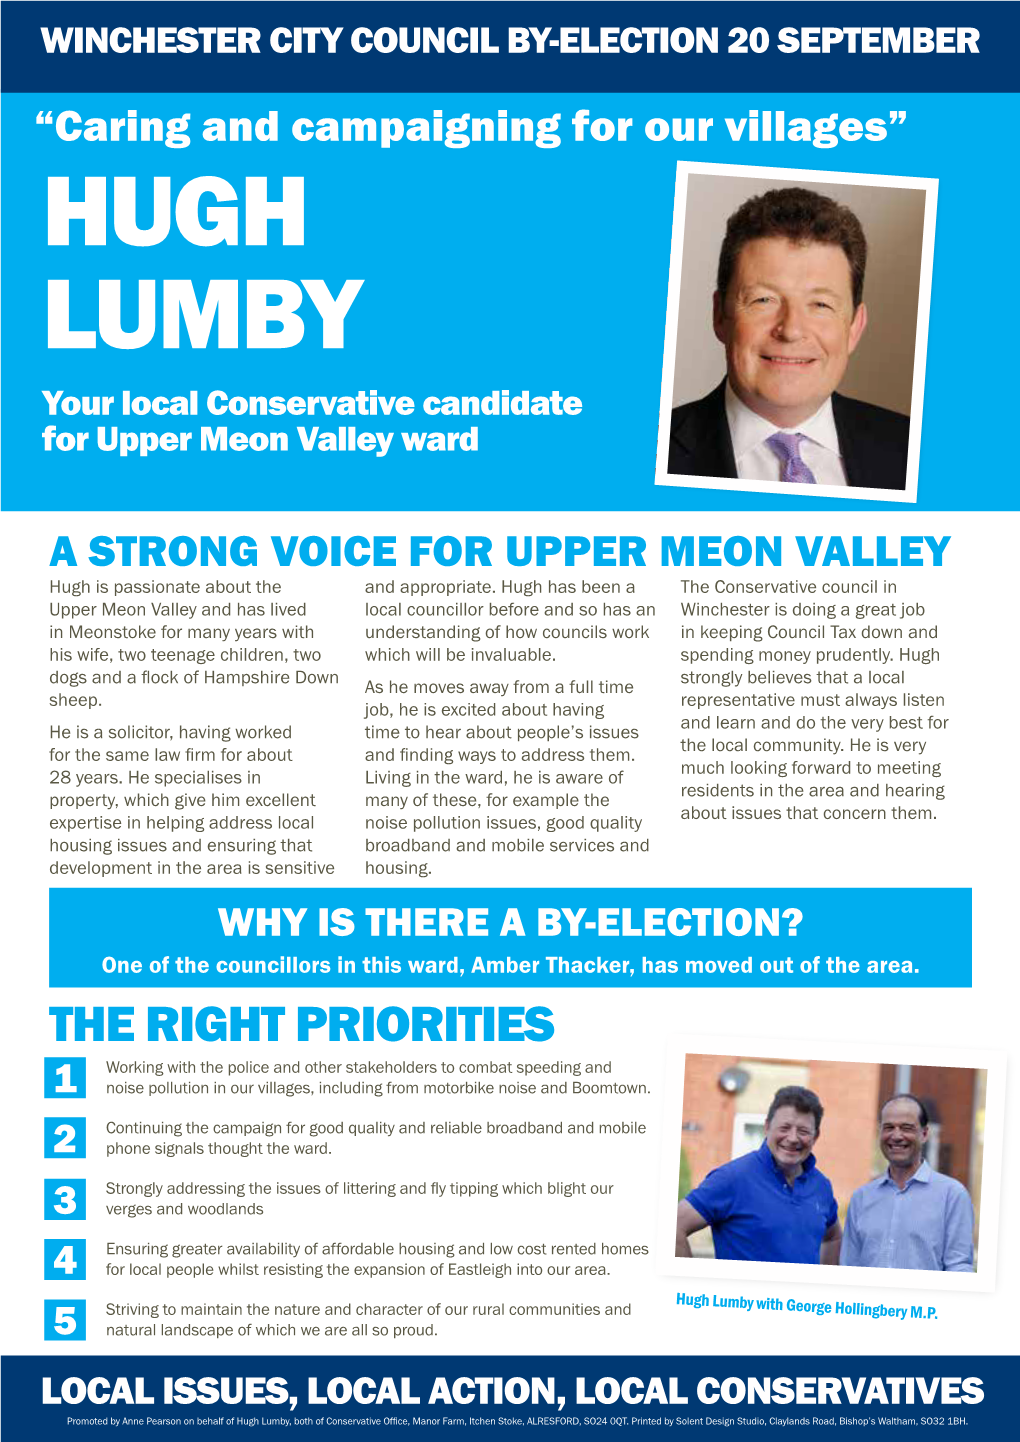 HUGH LUMBY Your Local Conservative Candidate for Upper Meon Valley Ward